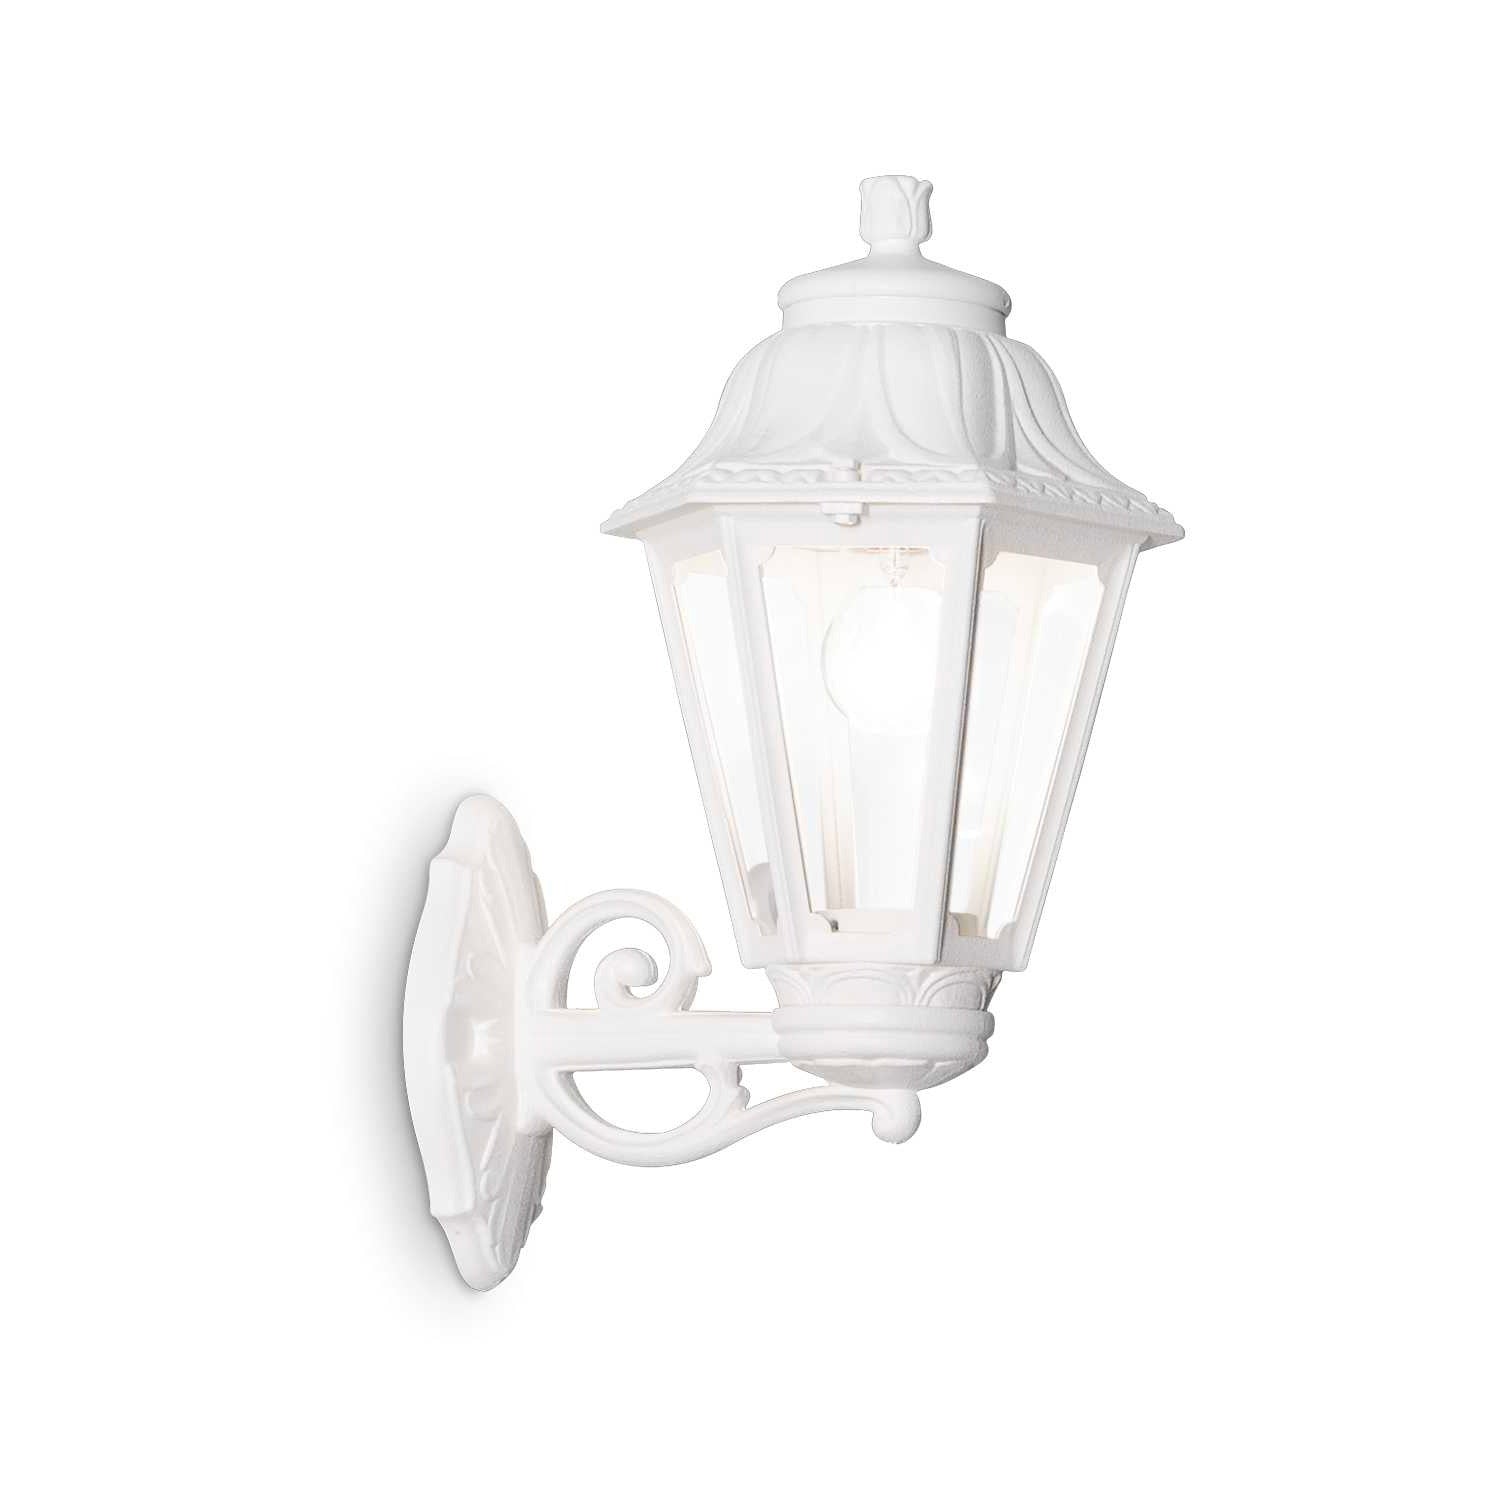 DAFNE - Old wrought iron wall light